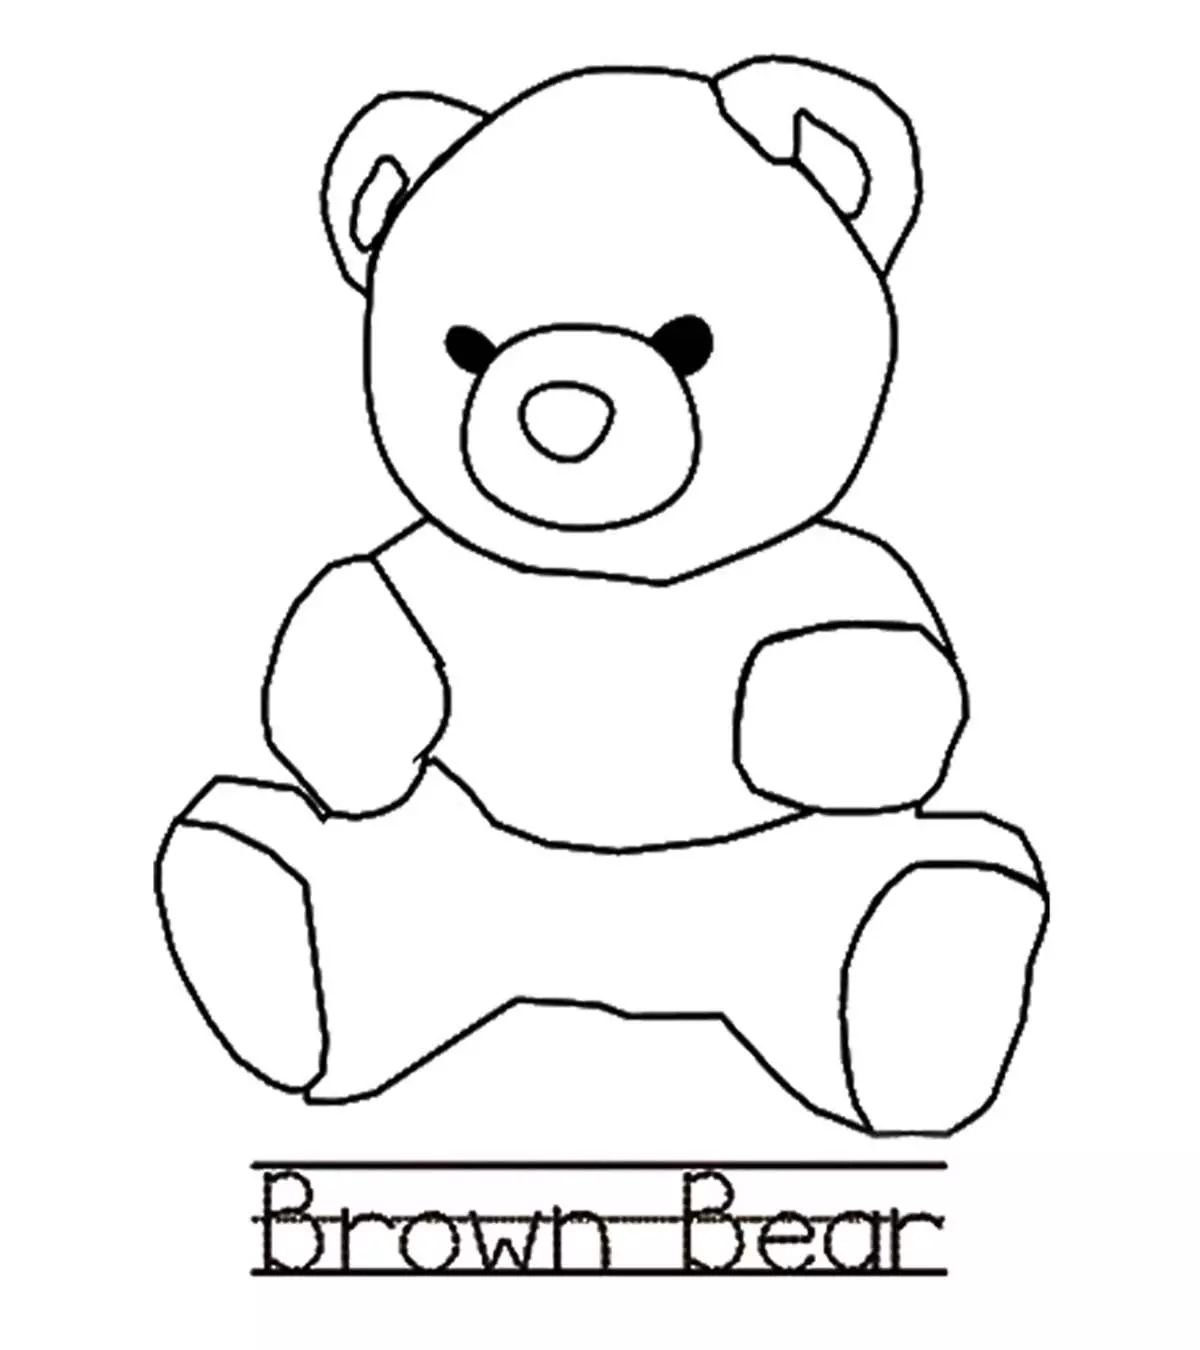 Top 10 Letter ‘B’ Coloring Pages Your Toddler Will Love To Learn & Color